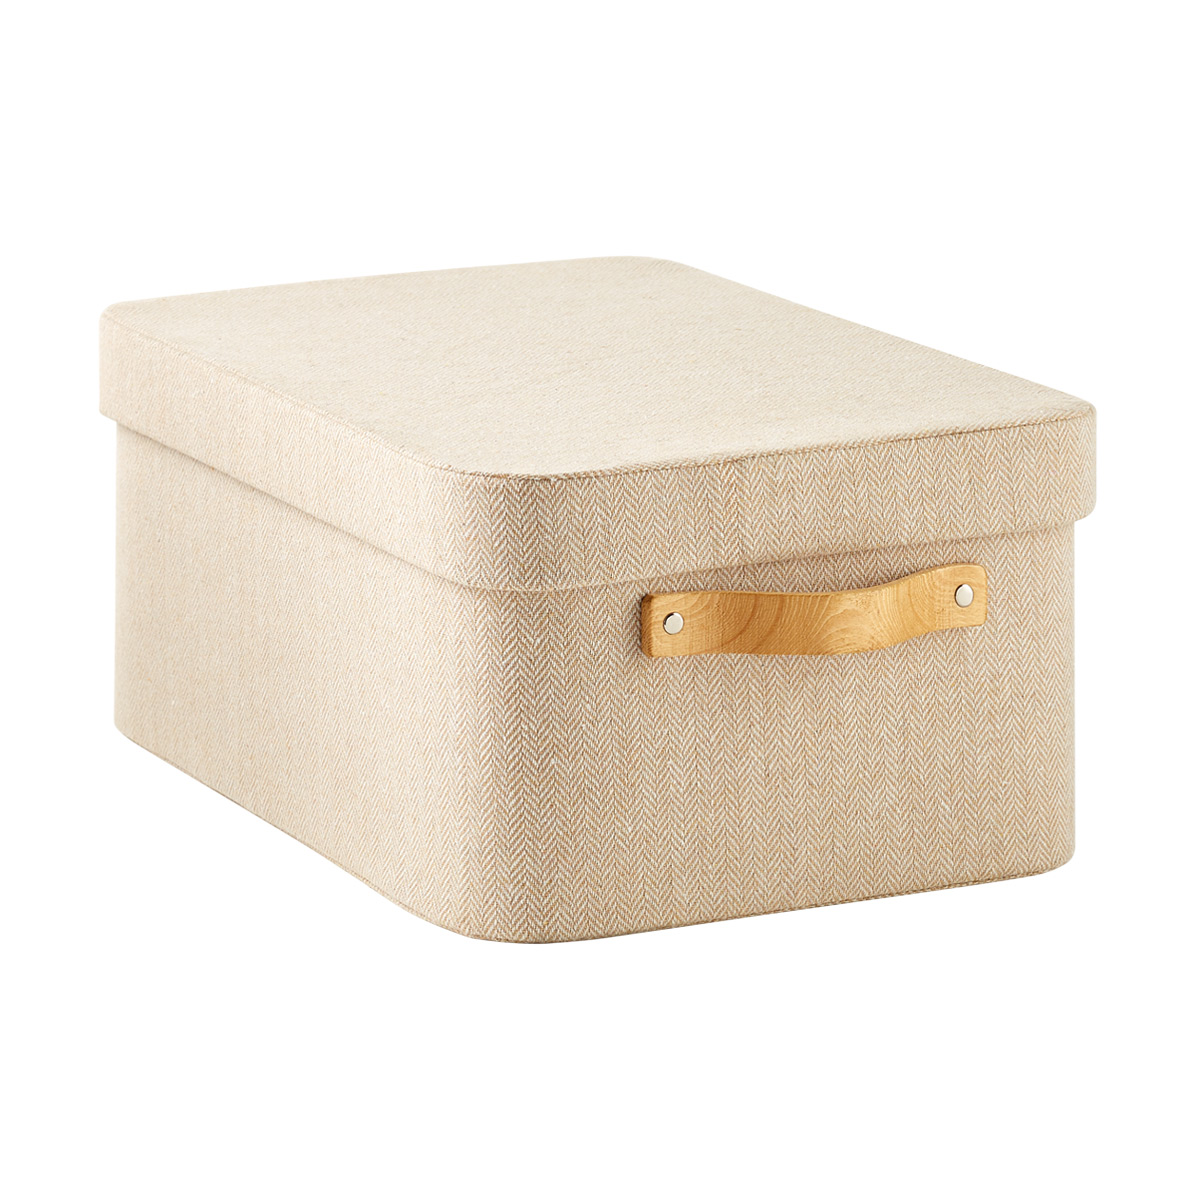 Made Goods Connery Raffia Box | Made goods, House warming gifts, Decorative  boxes